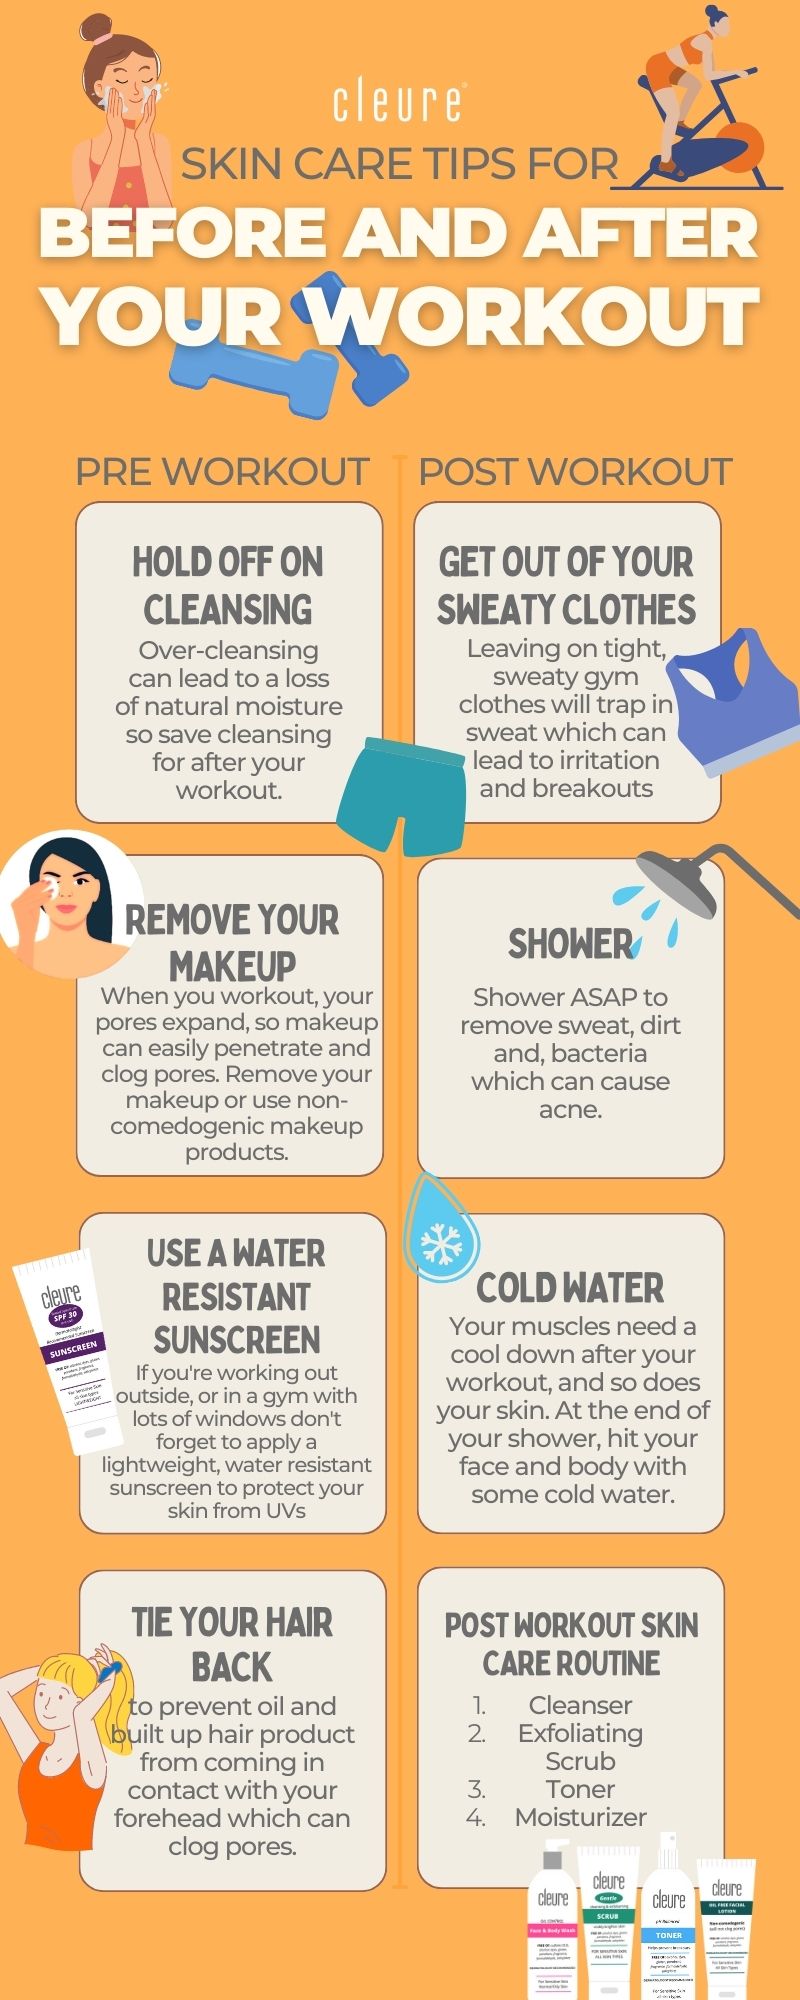 Tips for Taking Care of Your Skin Pre and Post Surgery